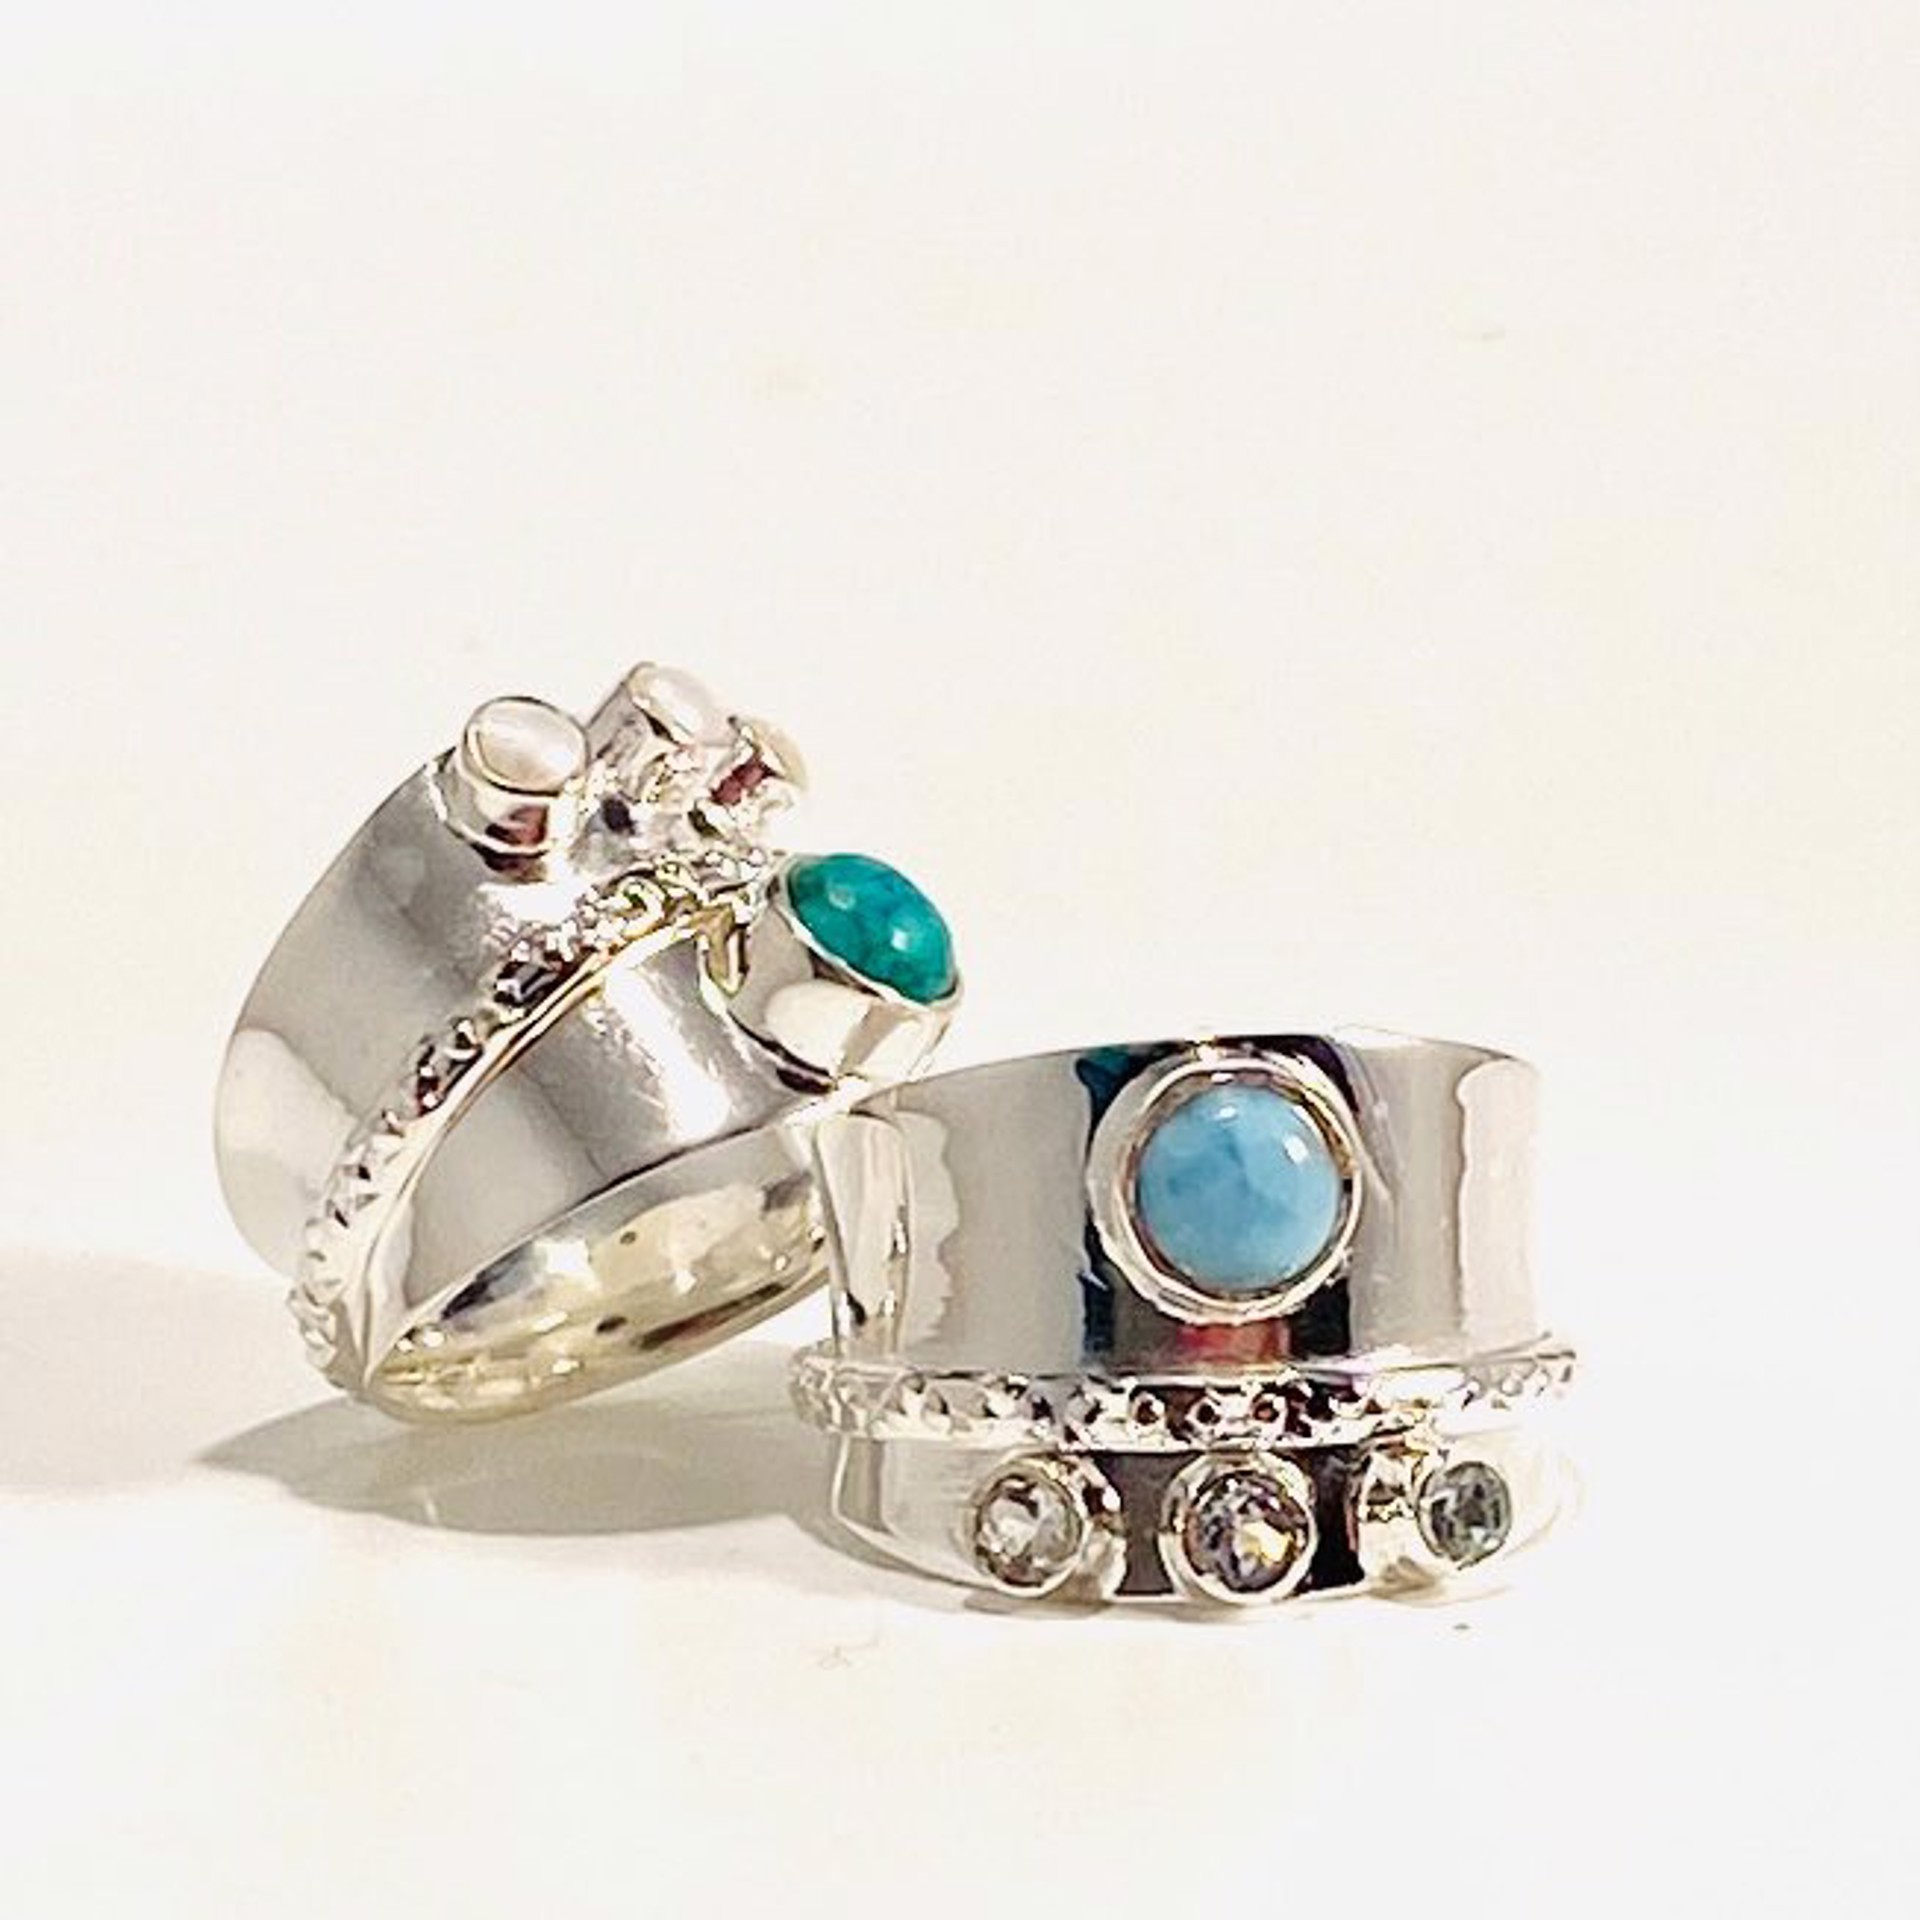 MON SR 3209 Larimar Blue Topaz $100 or Turquoise Pearl $94 Spin Ring LIMITED SIZES by Monica Mehta